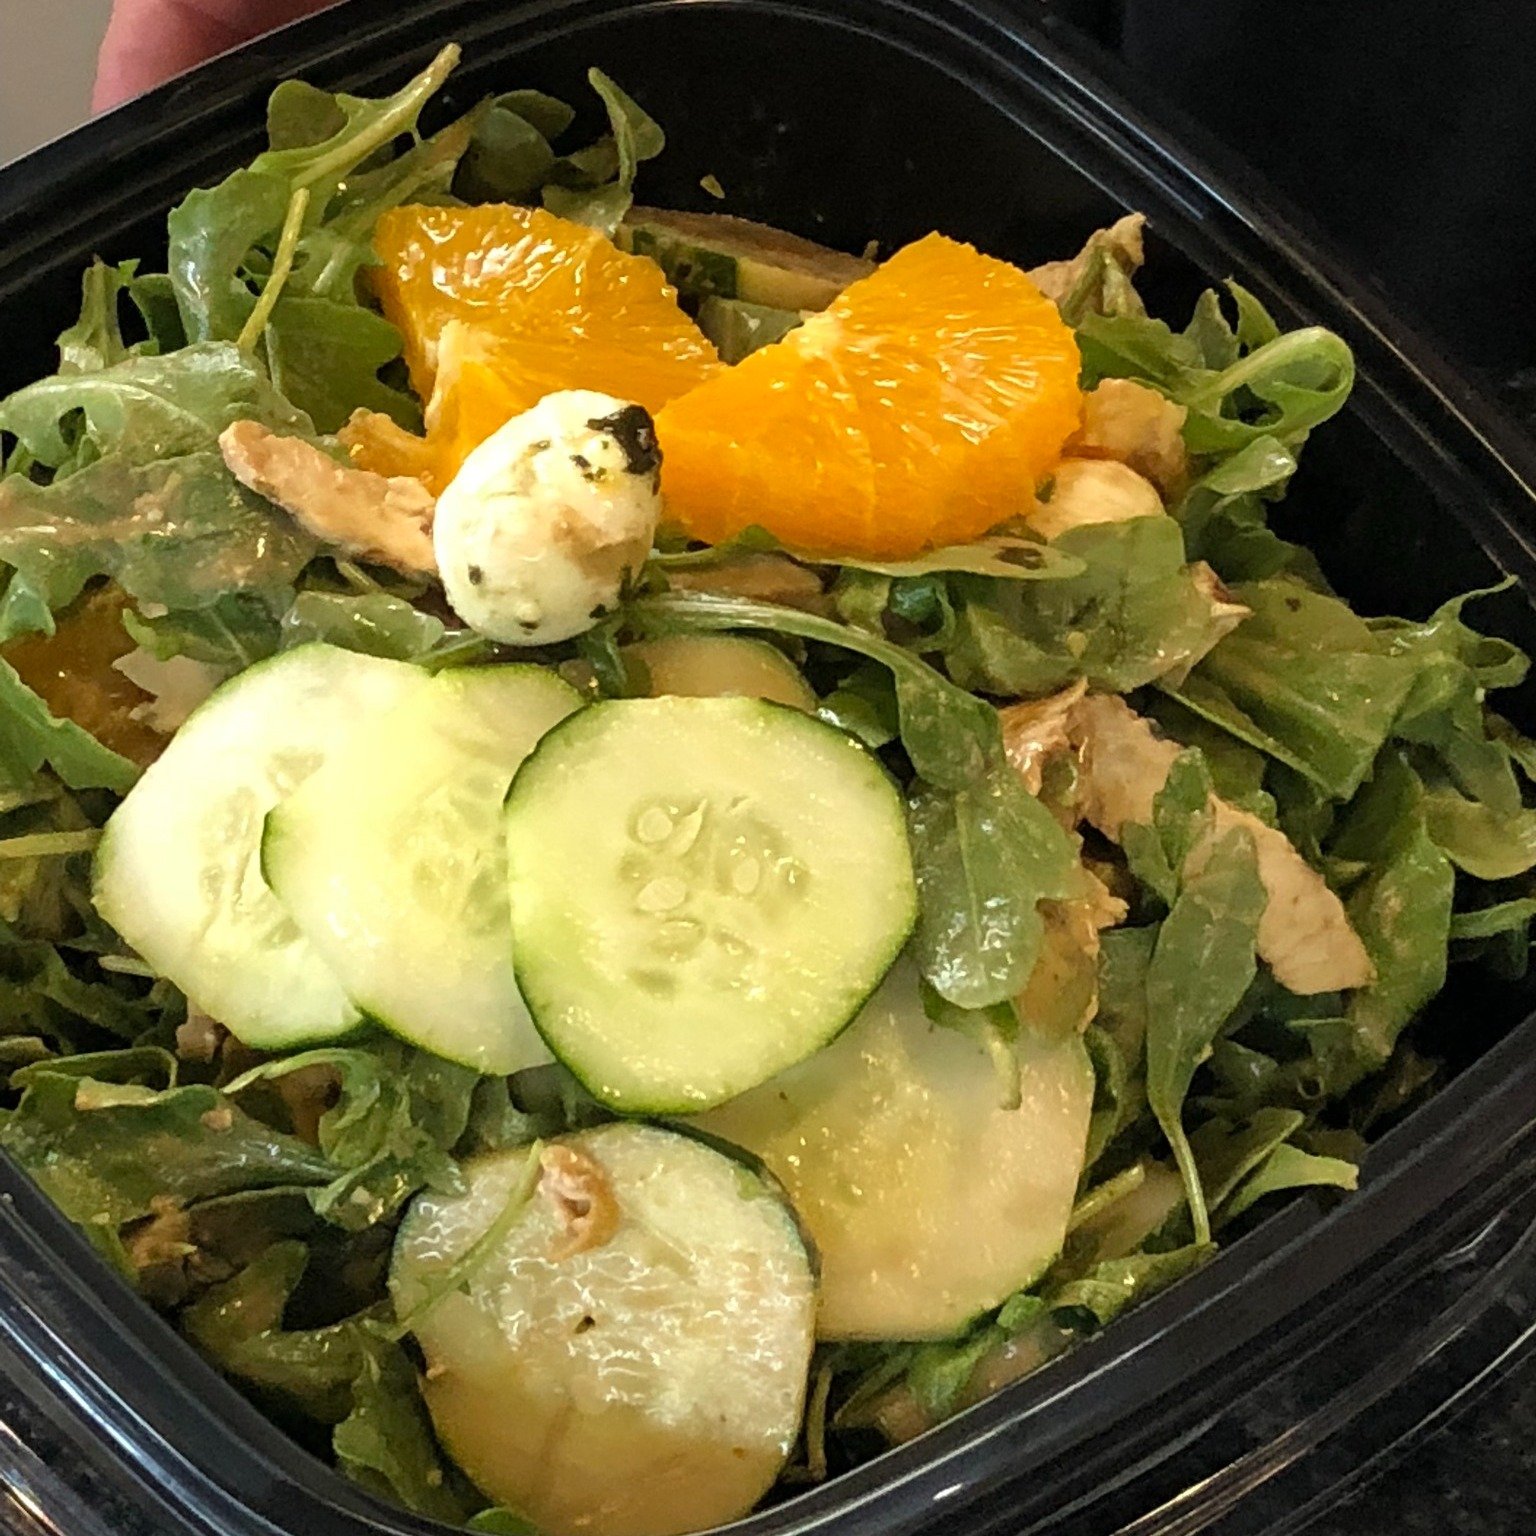 Our Salad Bar has been serving custom #chopped and #tossed salads in Westfield for 24 years.  We are Westfield's original salad bar.  With over 30 toppings to choose from you can create a salad your way!  Need inspiration we also have our daily salad